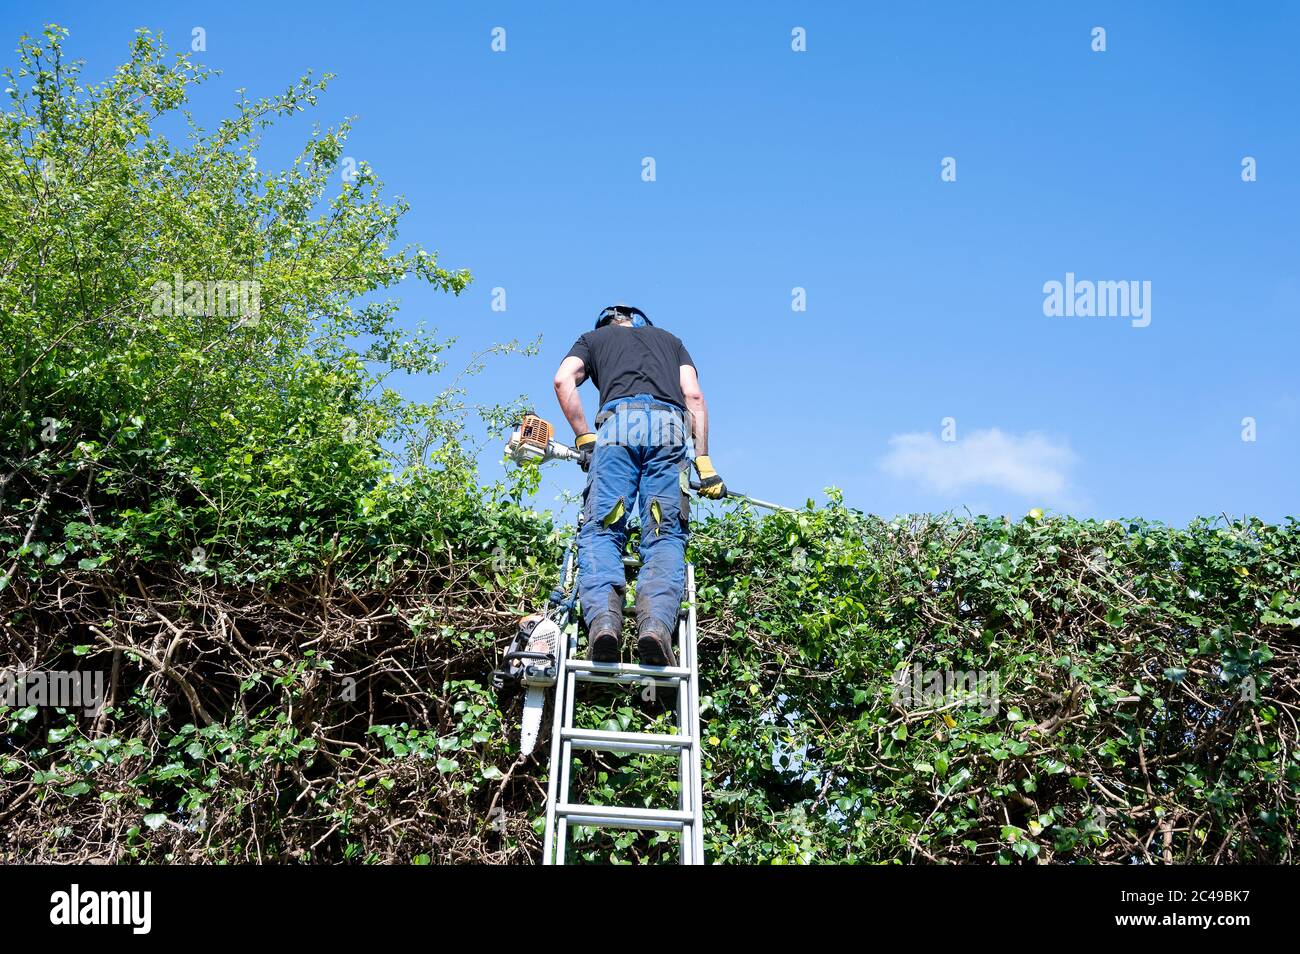 A Tree Surgeon or Arborist using power tools to cut a high hedge Stock Photo